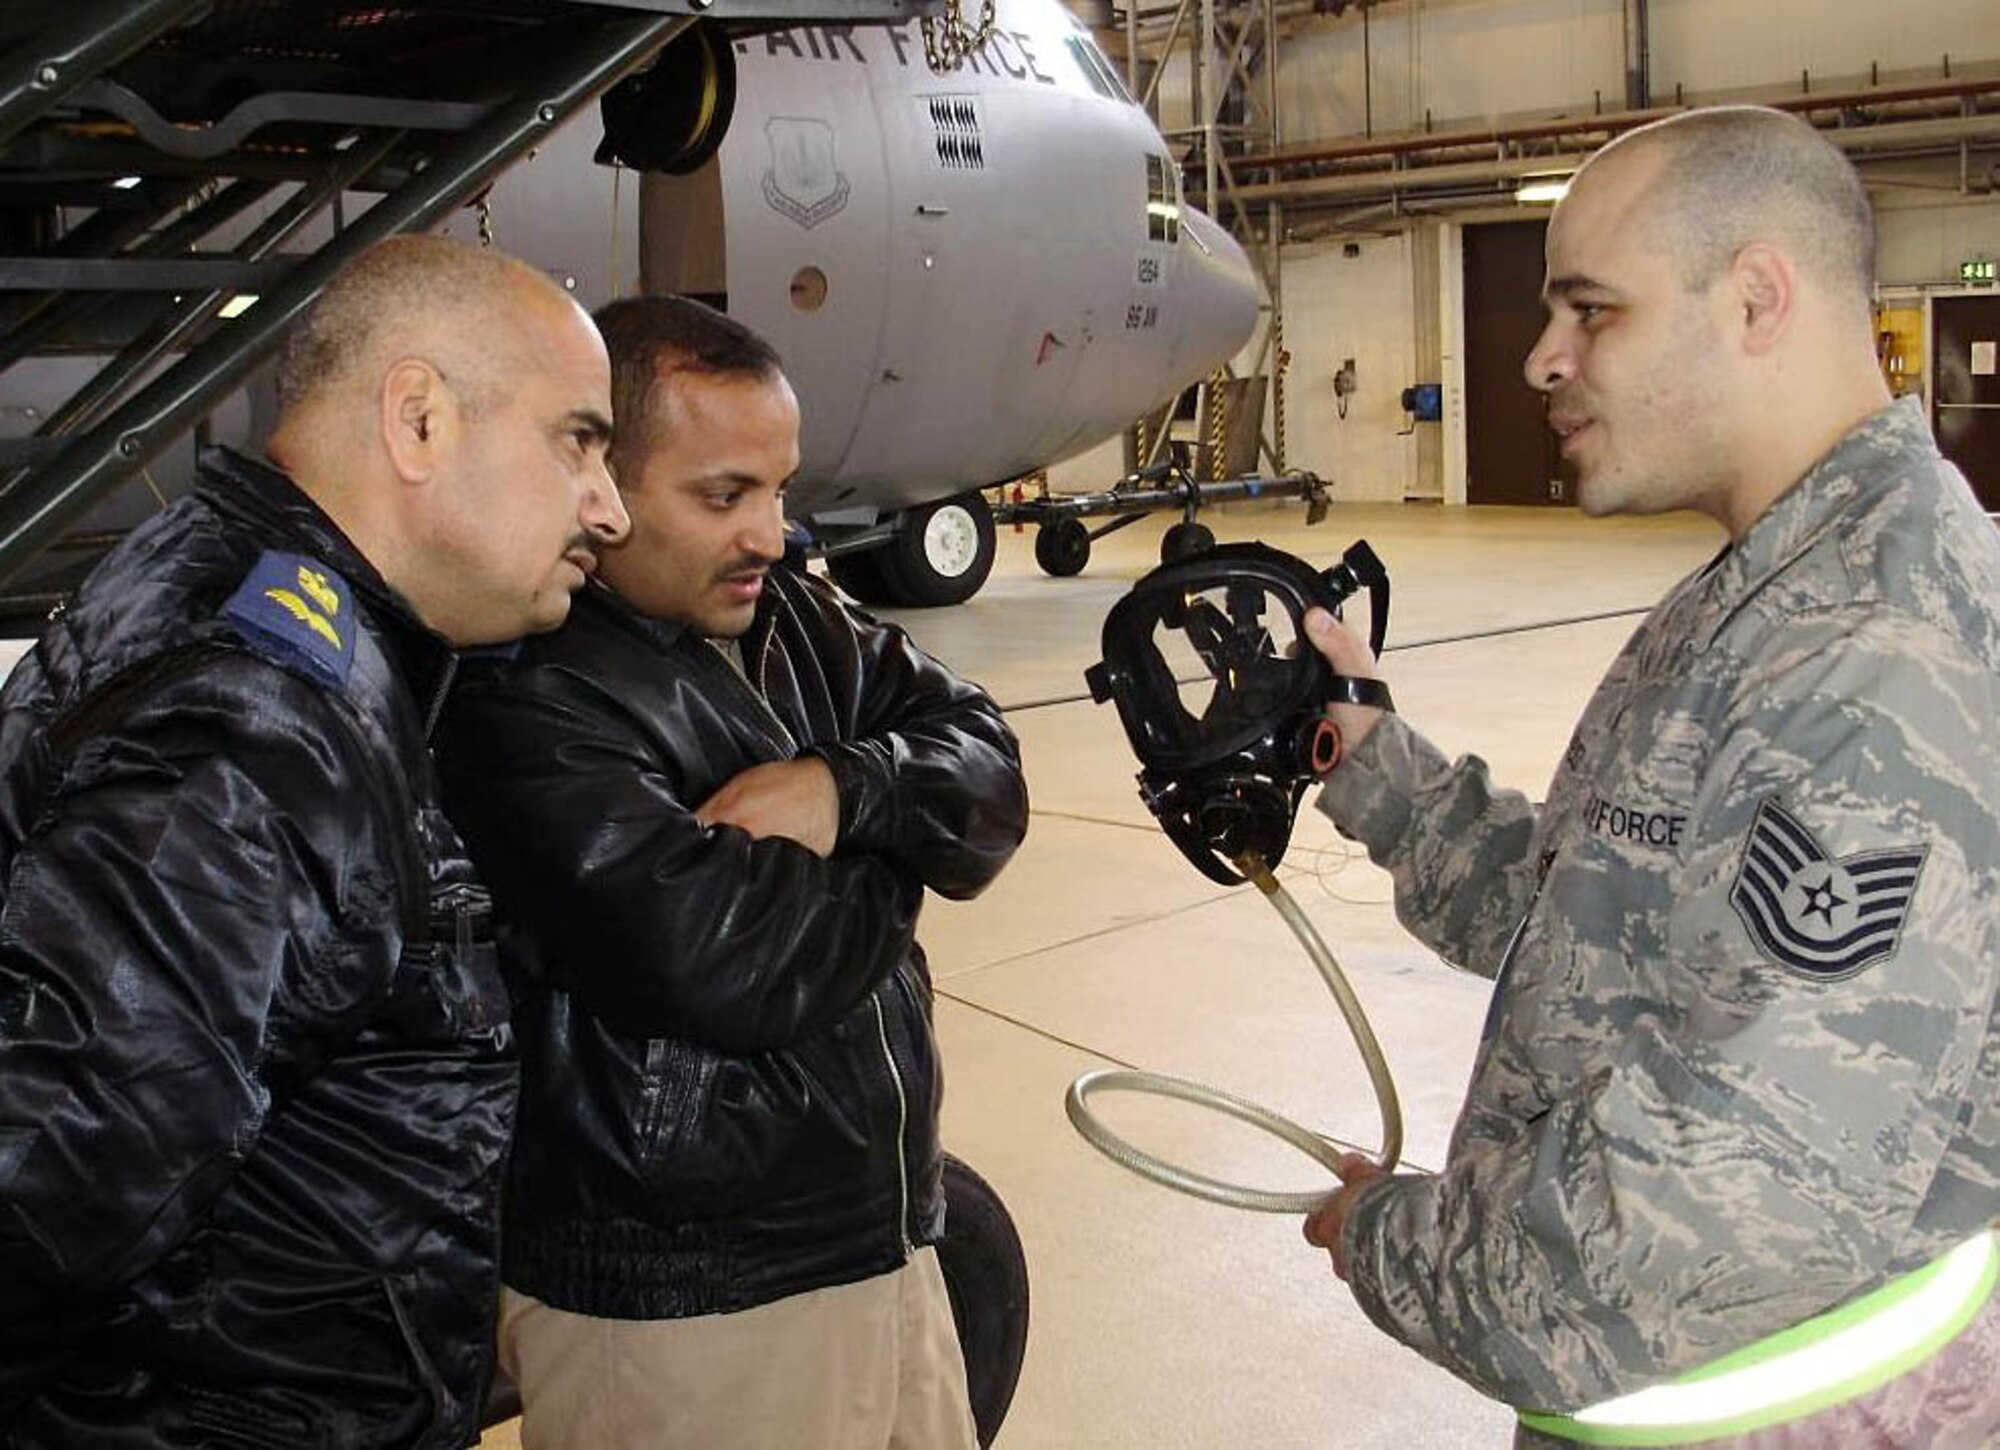 Tech. Sgt. Ruben Rodriguez, 86th Maintenance Squadron, talks about the air mask that he uses when going inside the fuel tanks of a C-130 Hercules to the Iraqi Air Force flight surgeons, Major (Dr.) Abdulrazzaq and Lieutenant (Dr.) Hazem at Ramstein Air Force Base, Germany March 13 2009.  The Iraqi flight surgeons traveled to the annual United States Air Forces in Europe Flight Surgeon Conference at Ramstein AFB, Germany where they shared life-saving lessons with the other doctors at the conference and learned life-saving information that they will now be able to share with their fellow Iraqi doctors. (Courtesy photo)